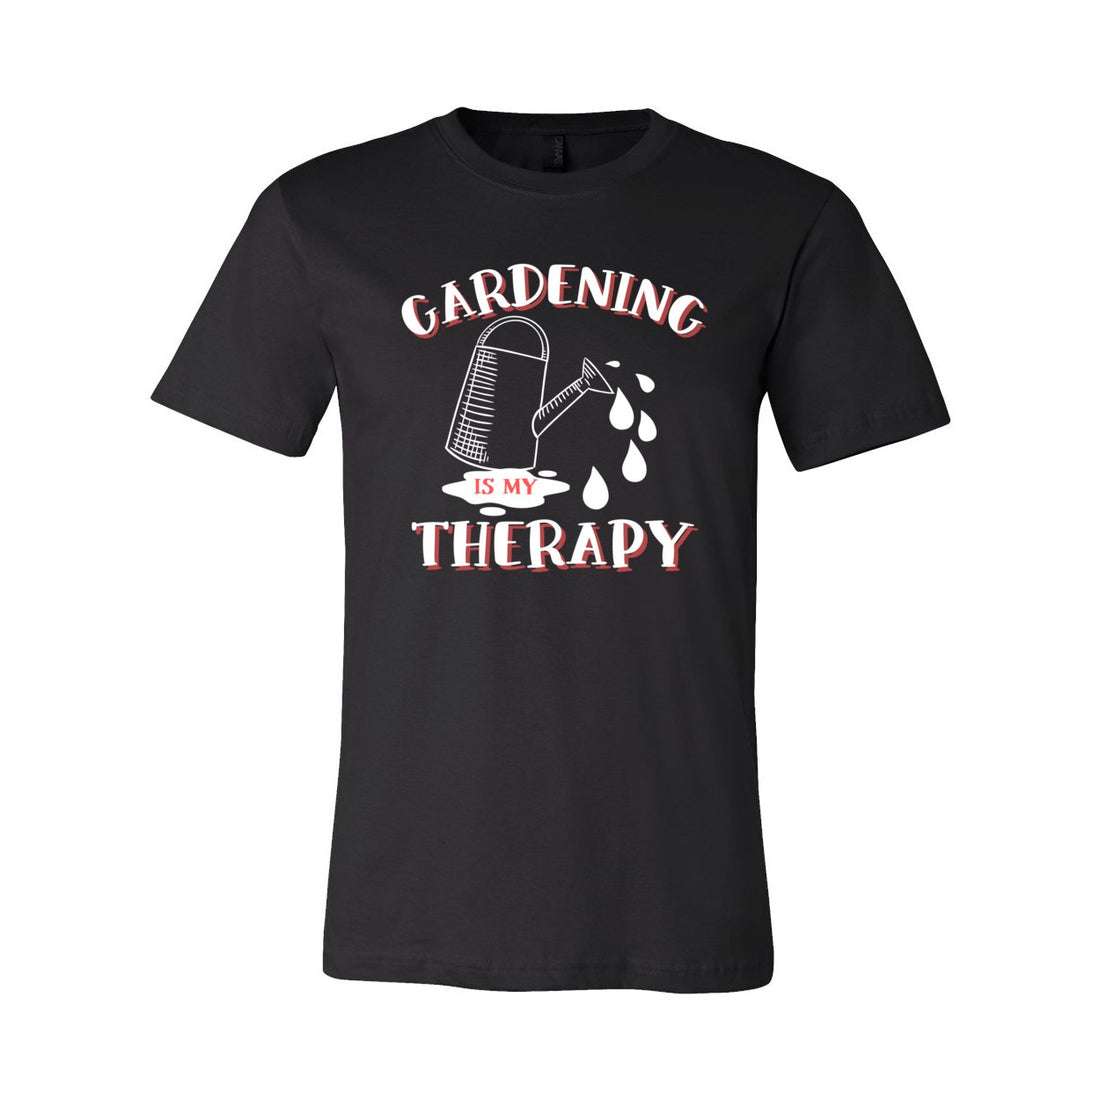 Gardening Therapy Short Sleeve Jersey Tee - T-Shirts - Positively Sassy - Gardening Therapy Short Sleeve Jersey Tee